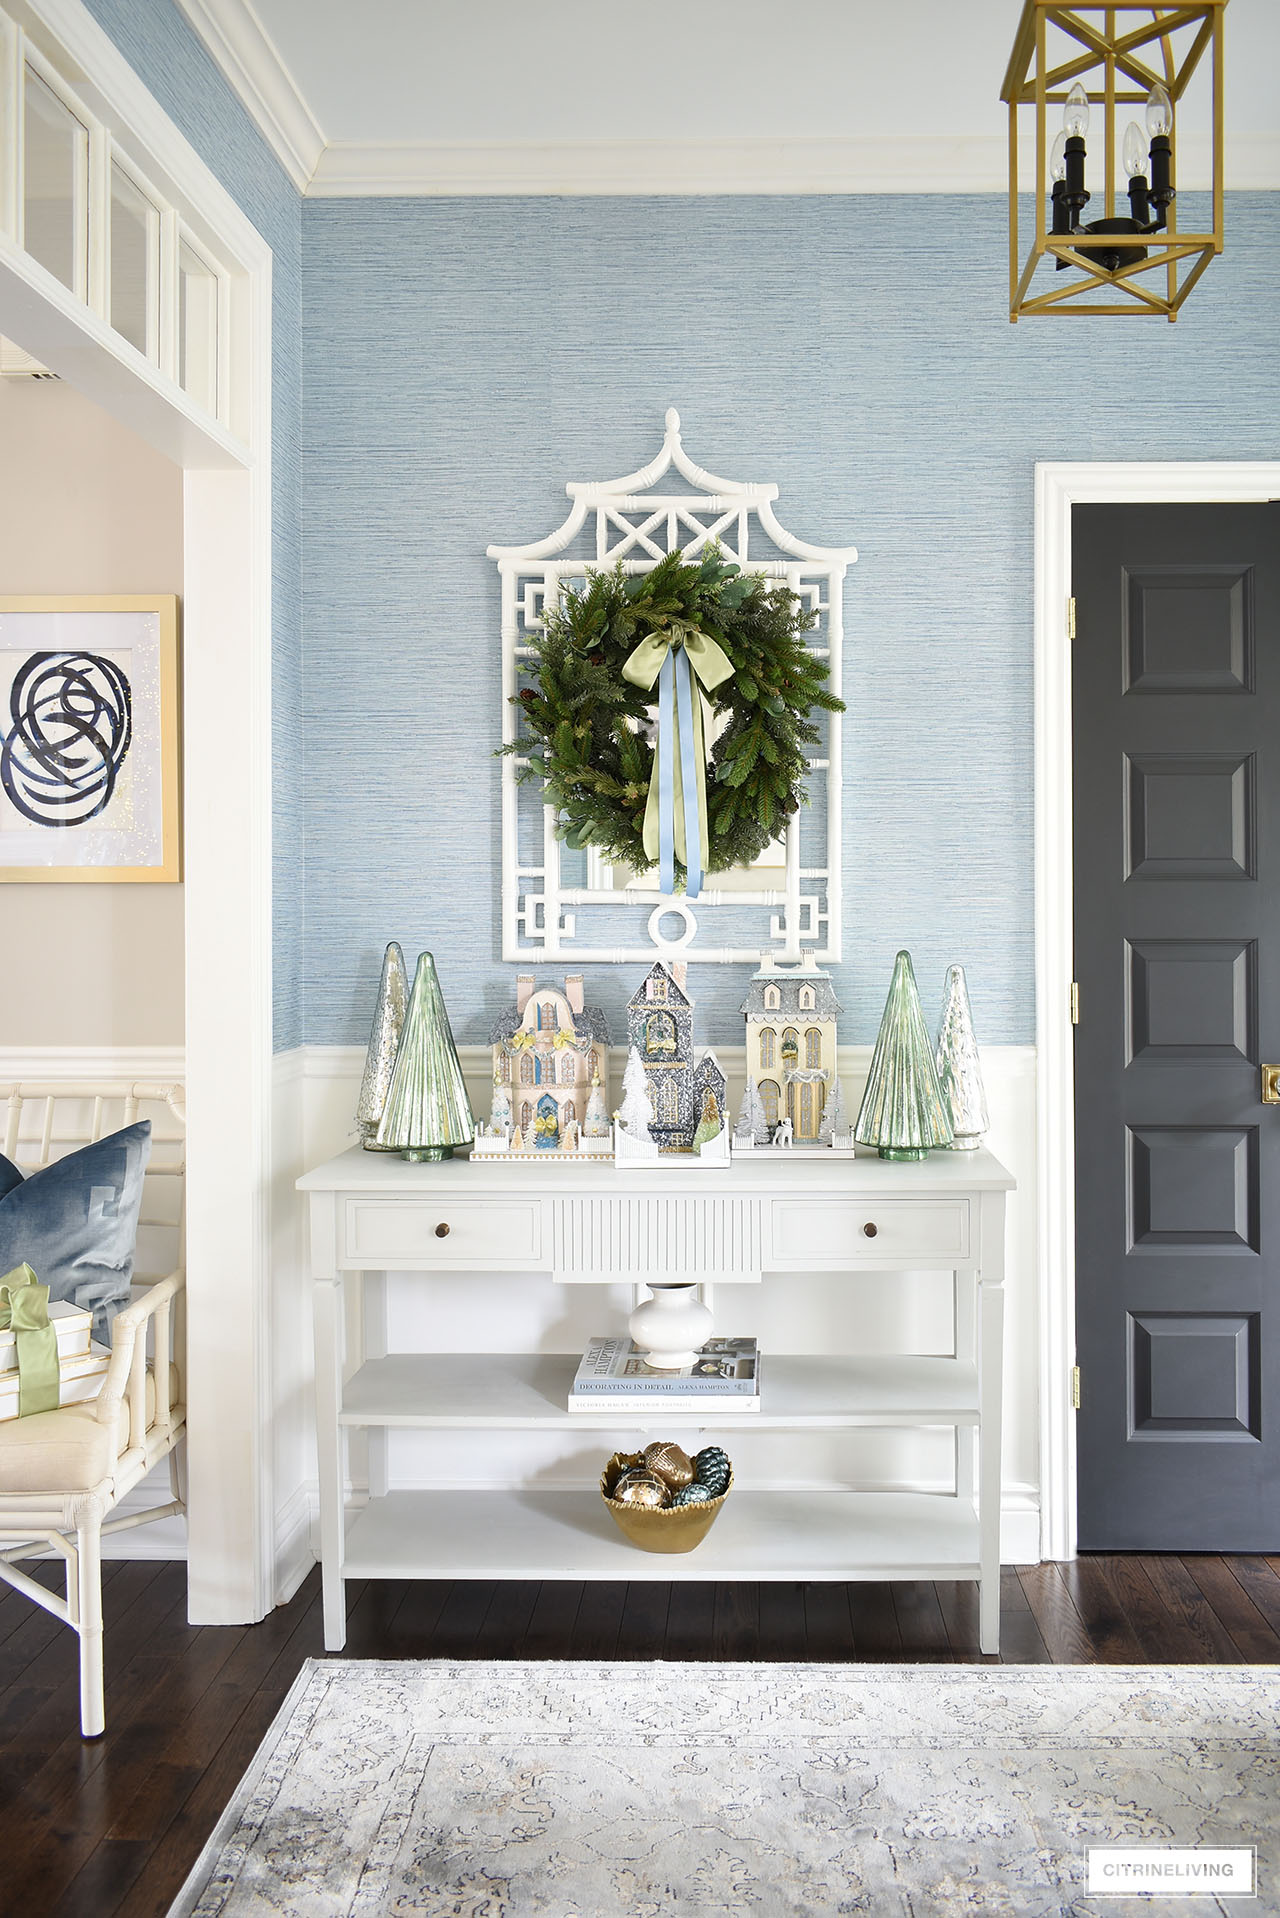 Elegant Christmas entryway decor with Christmas village houses and mercury glass trees styled on a classic console table. A lush green wreath adorned with elegant light green and light blue ribbons hangs above on a white pagoda mirror.